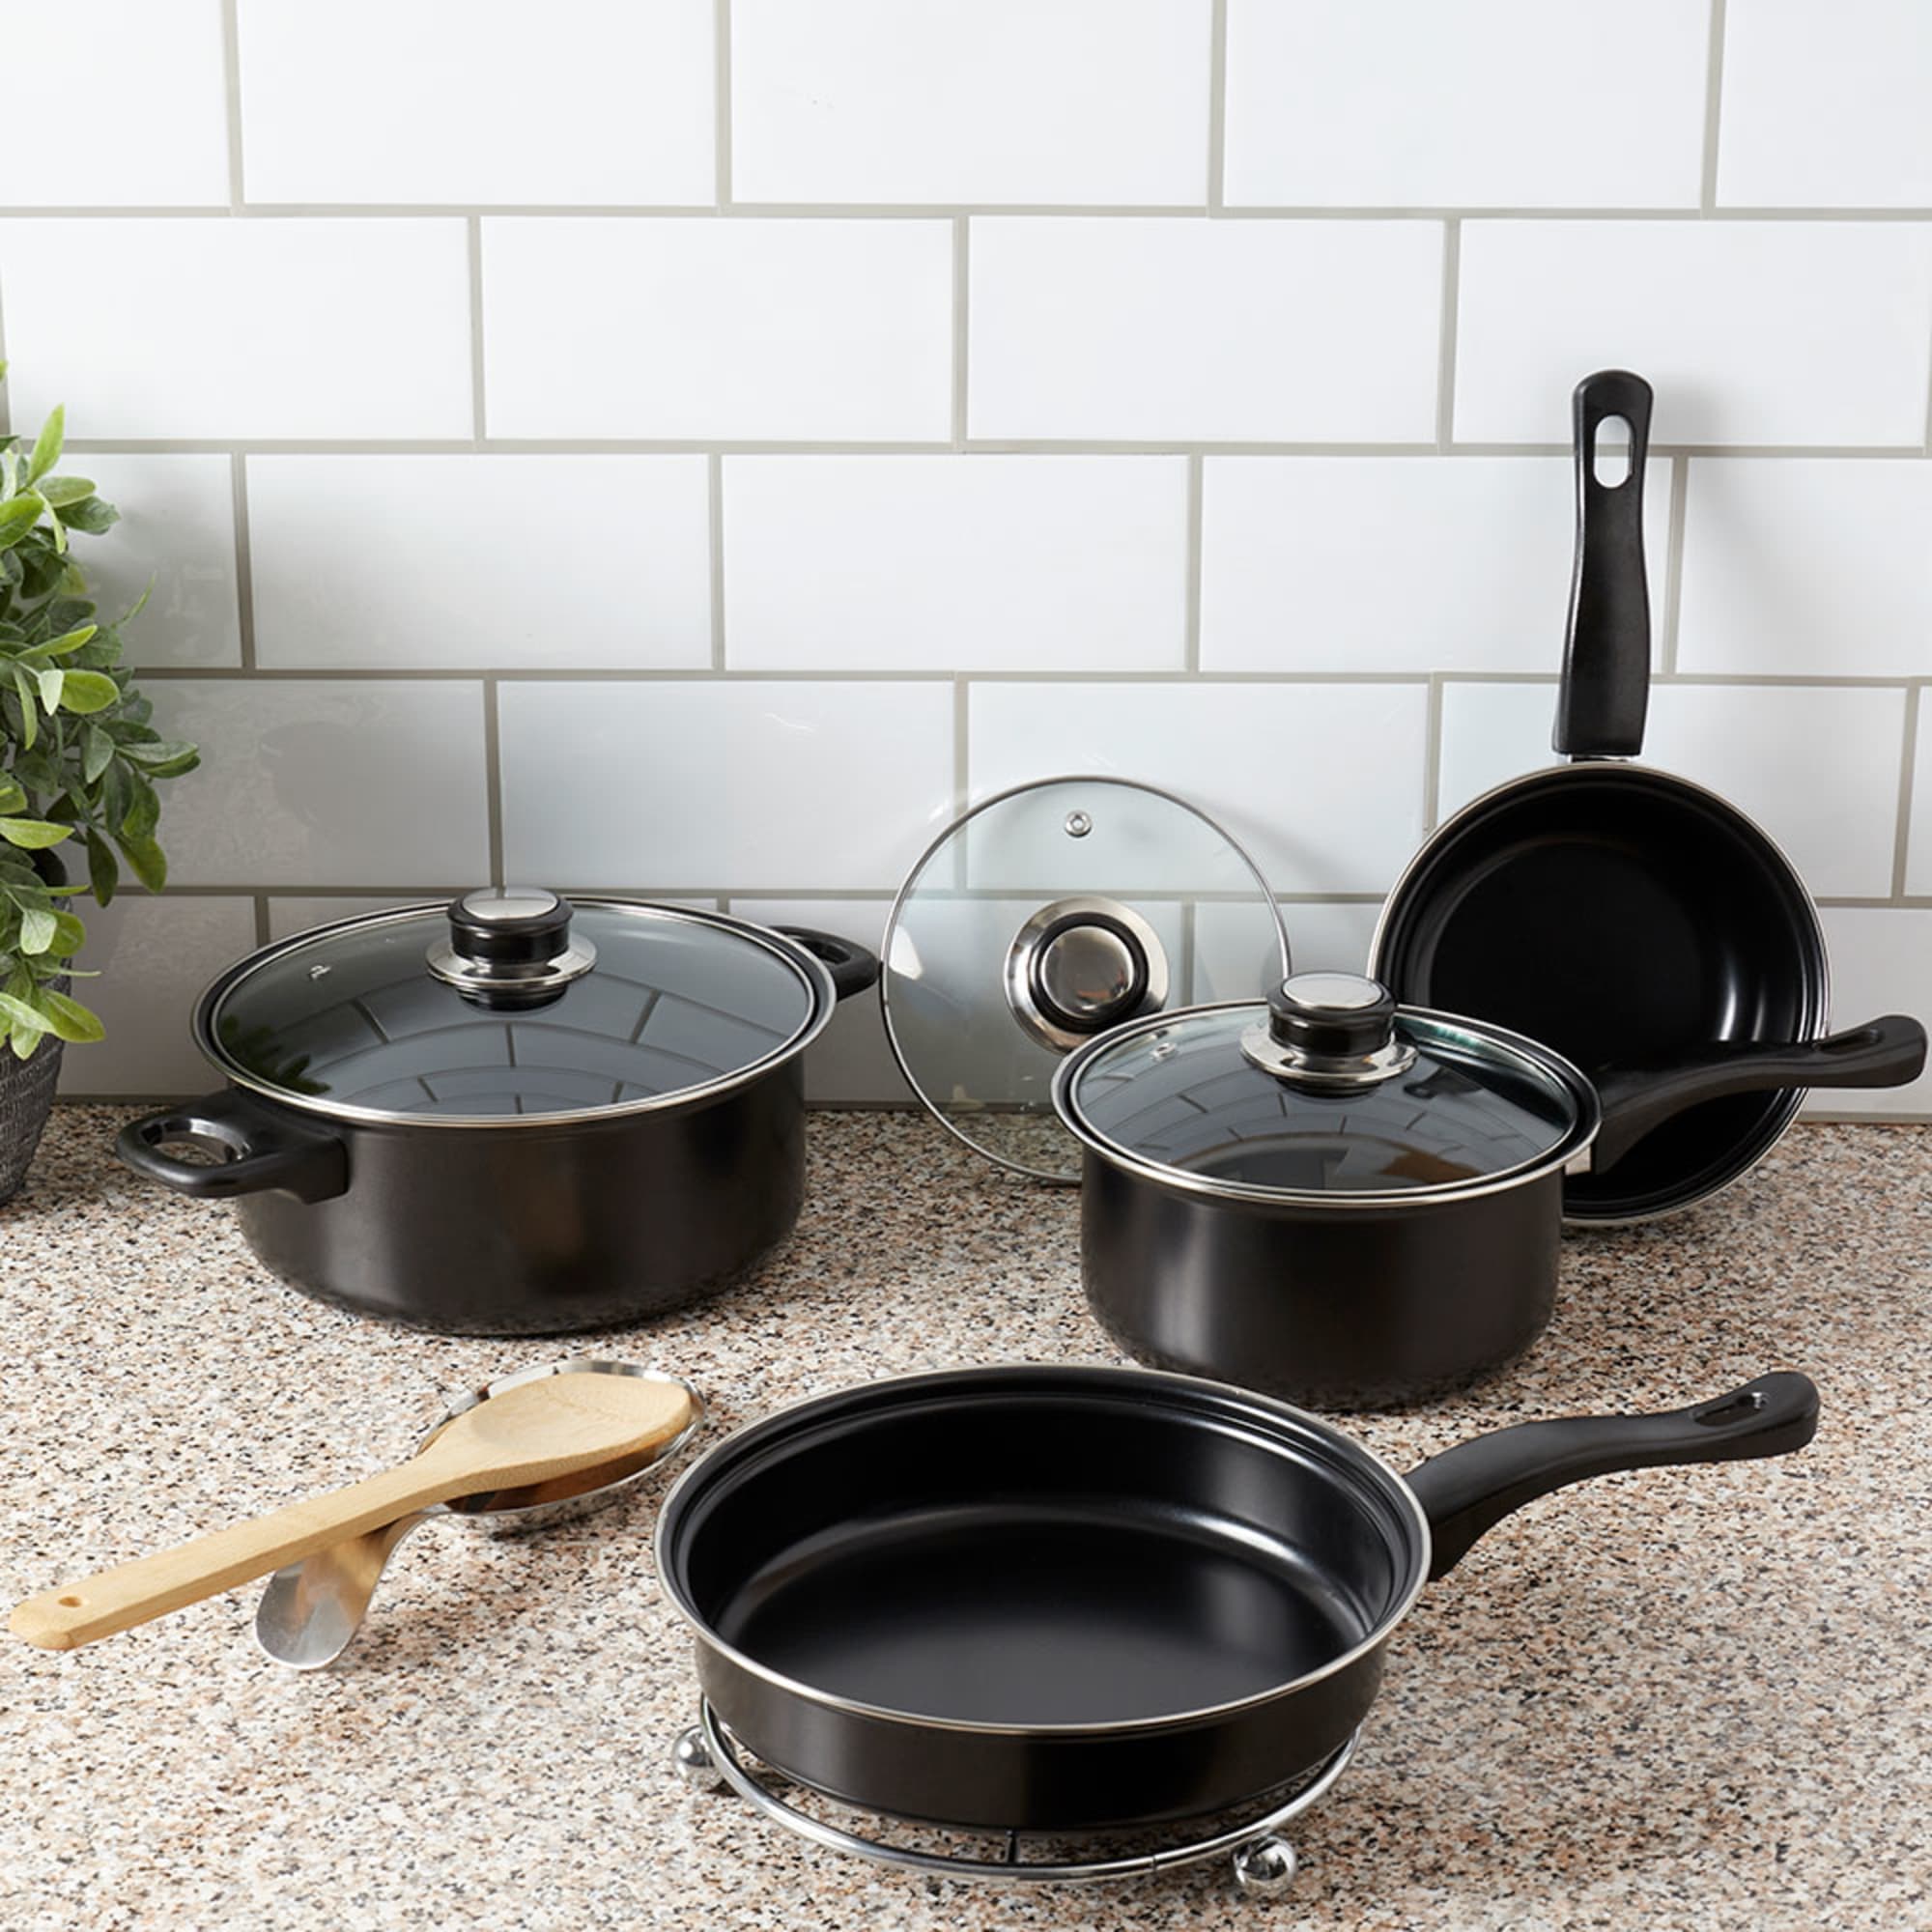 Home Basics Non-Stick 7 Piece Carbon Steel Cookware Set with Bakelite Handles $20 EACH, CASE PACK OF 6